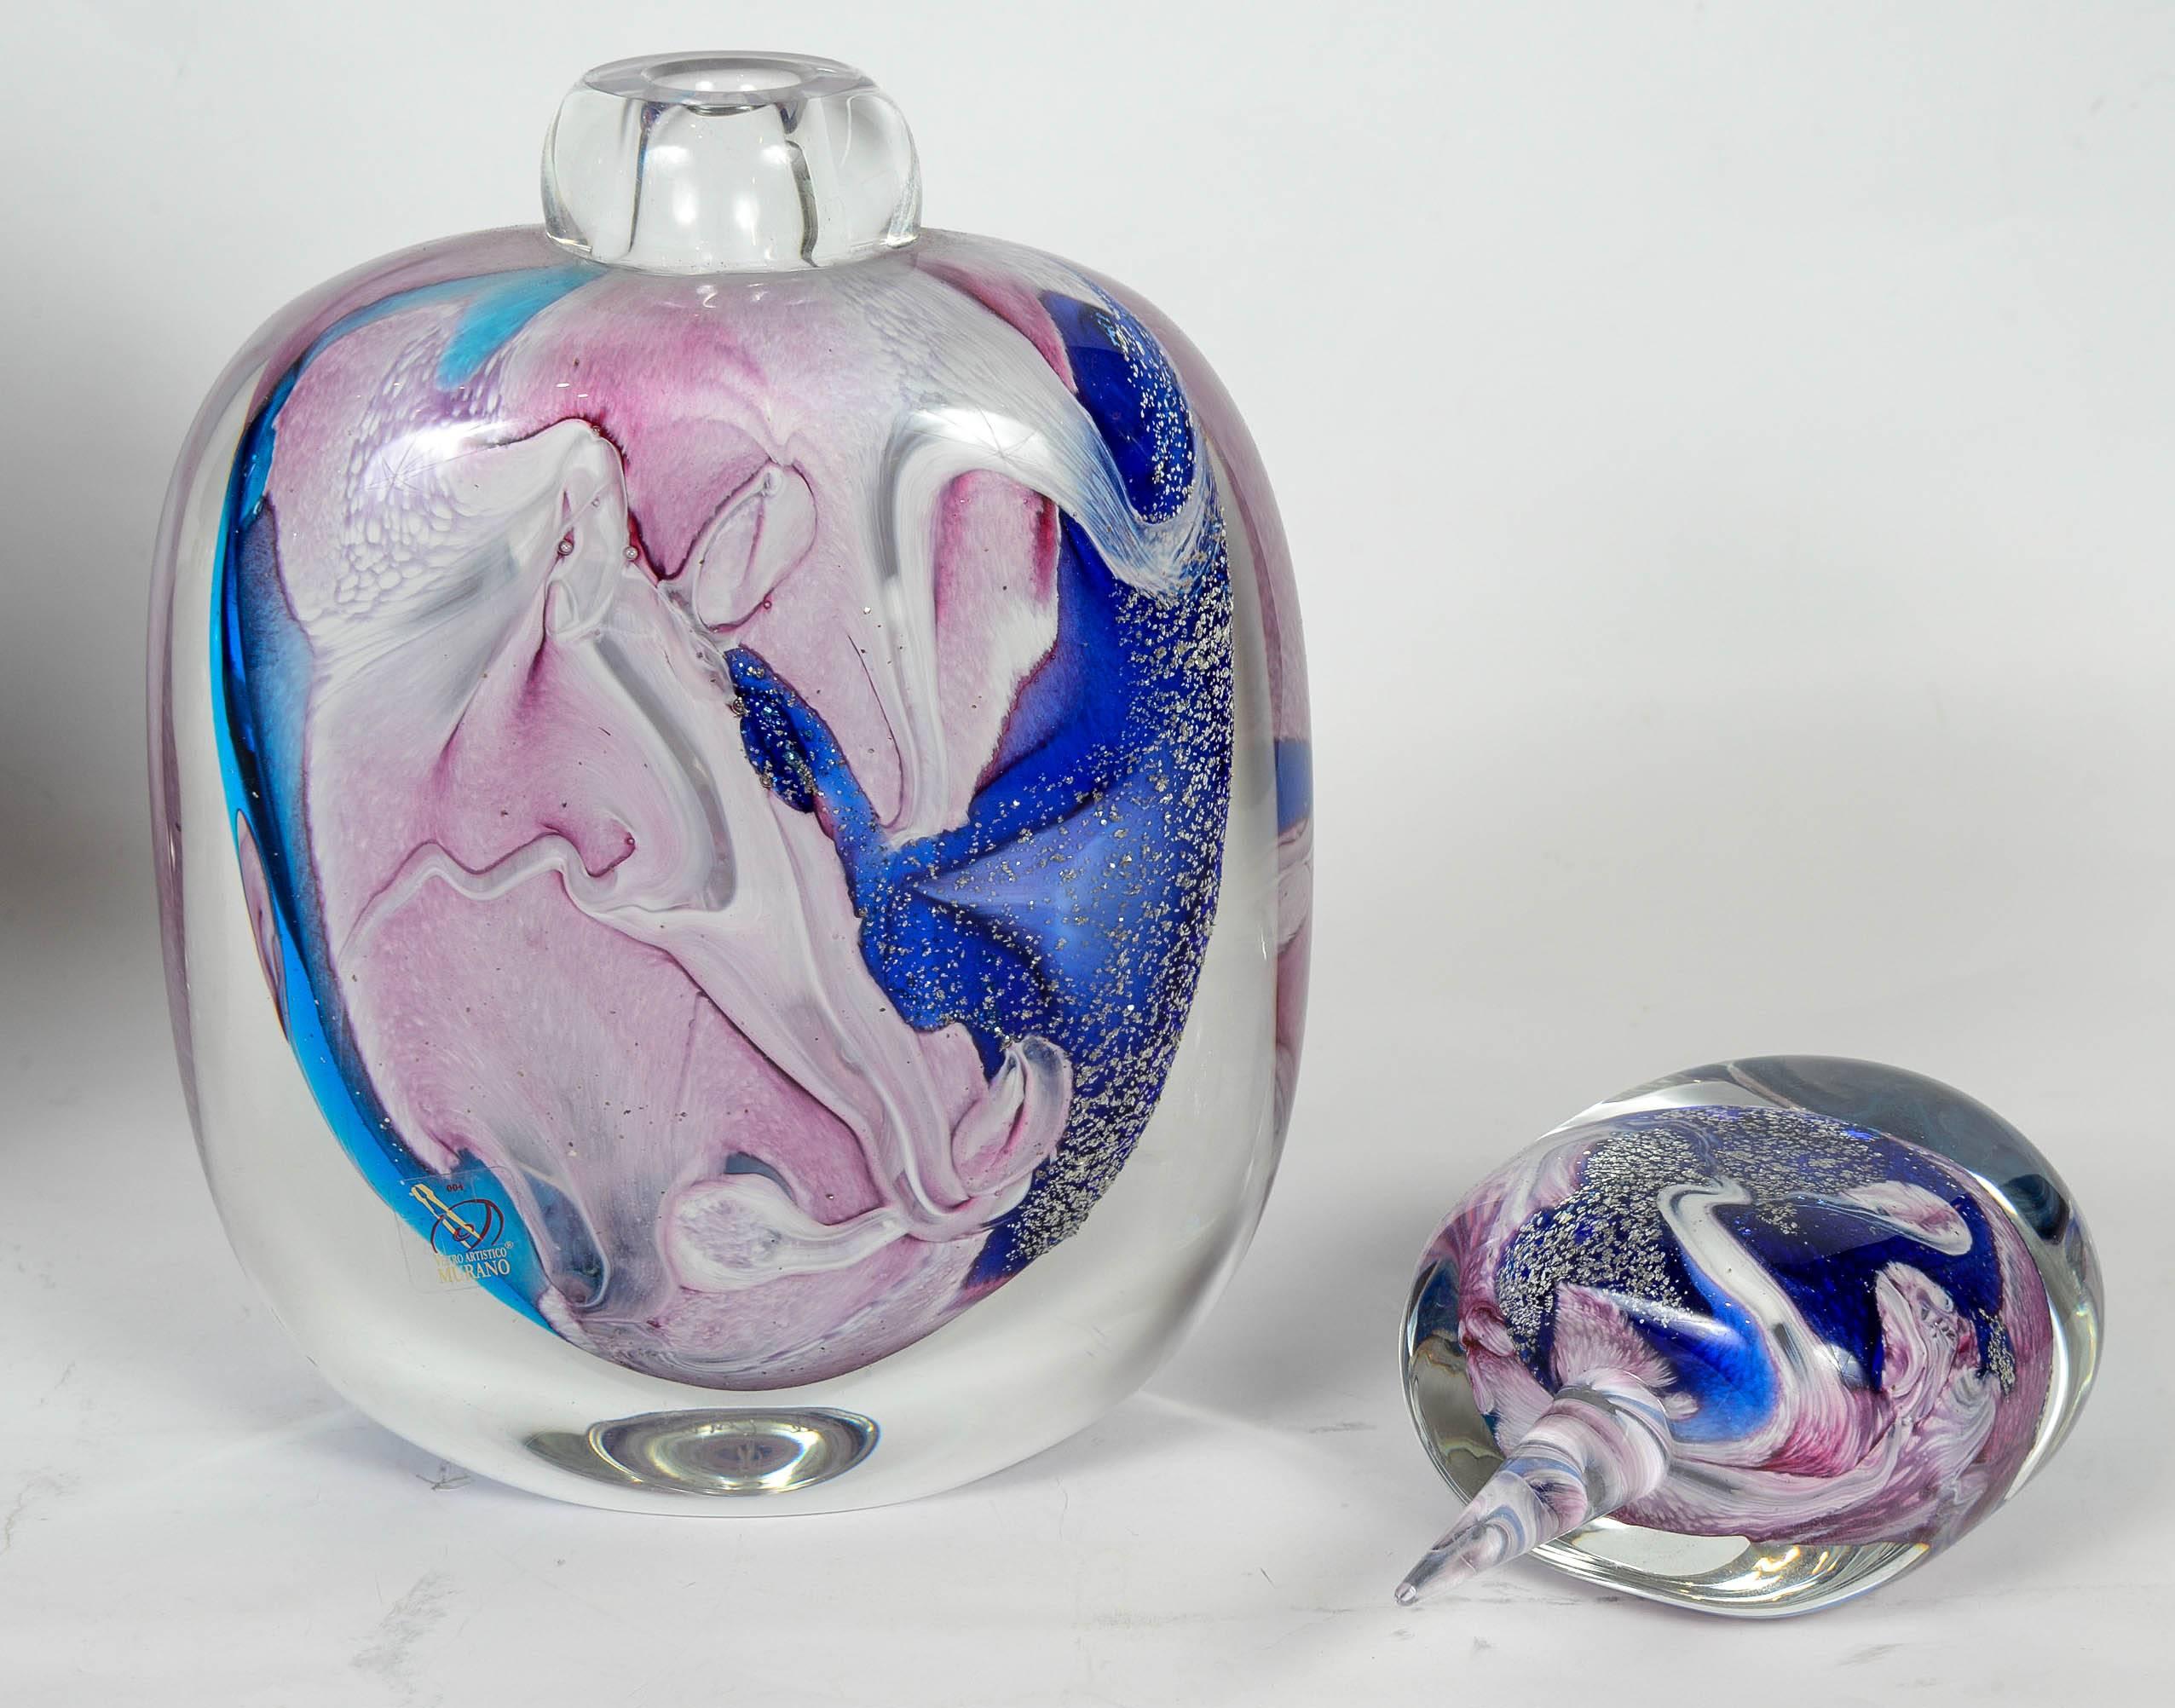 Late 20th Century Pair of Perfume Bottles in Murano Glass, Signed by Michele Onesto